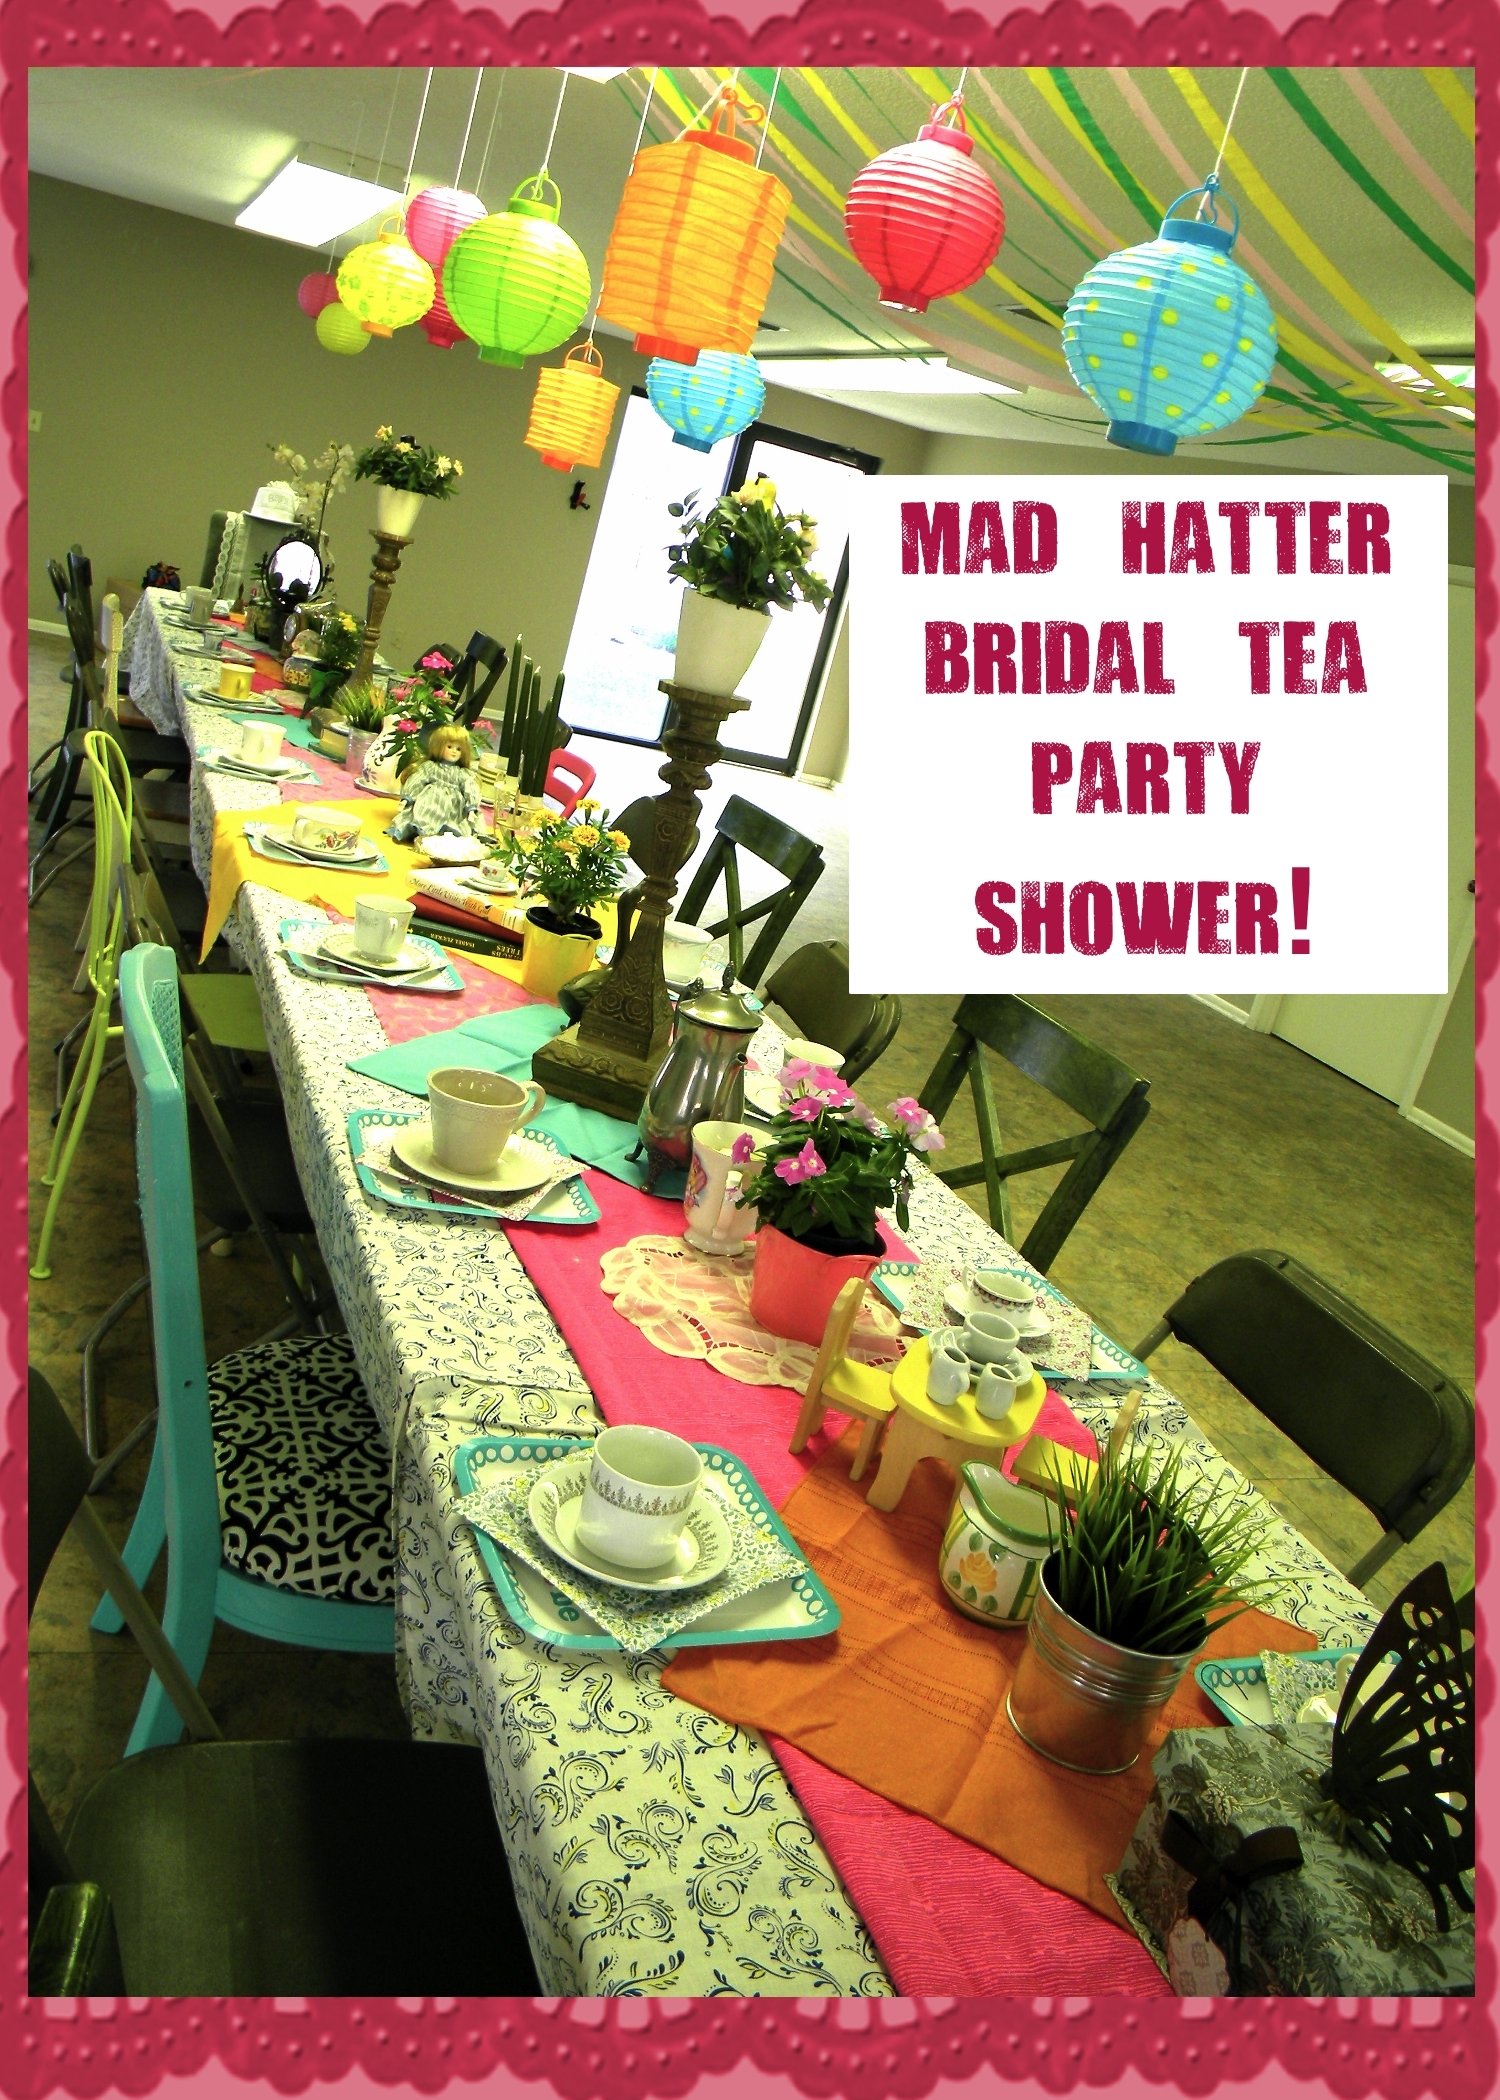 10 Most Popular Mad Hatters Tea Party Ideas photo mad hatter tea party image 2022